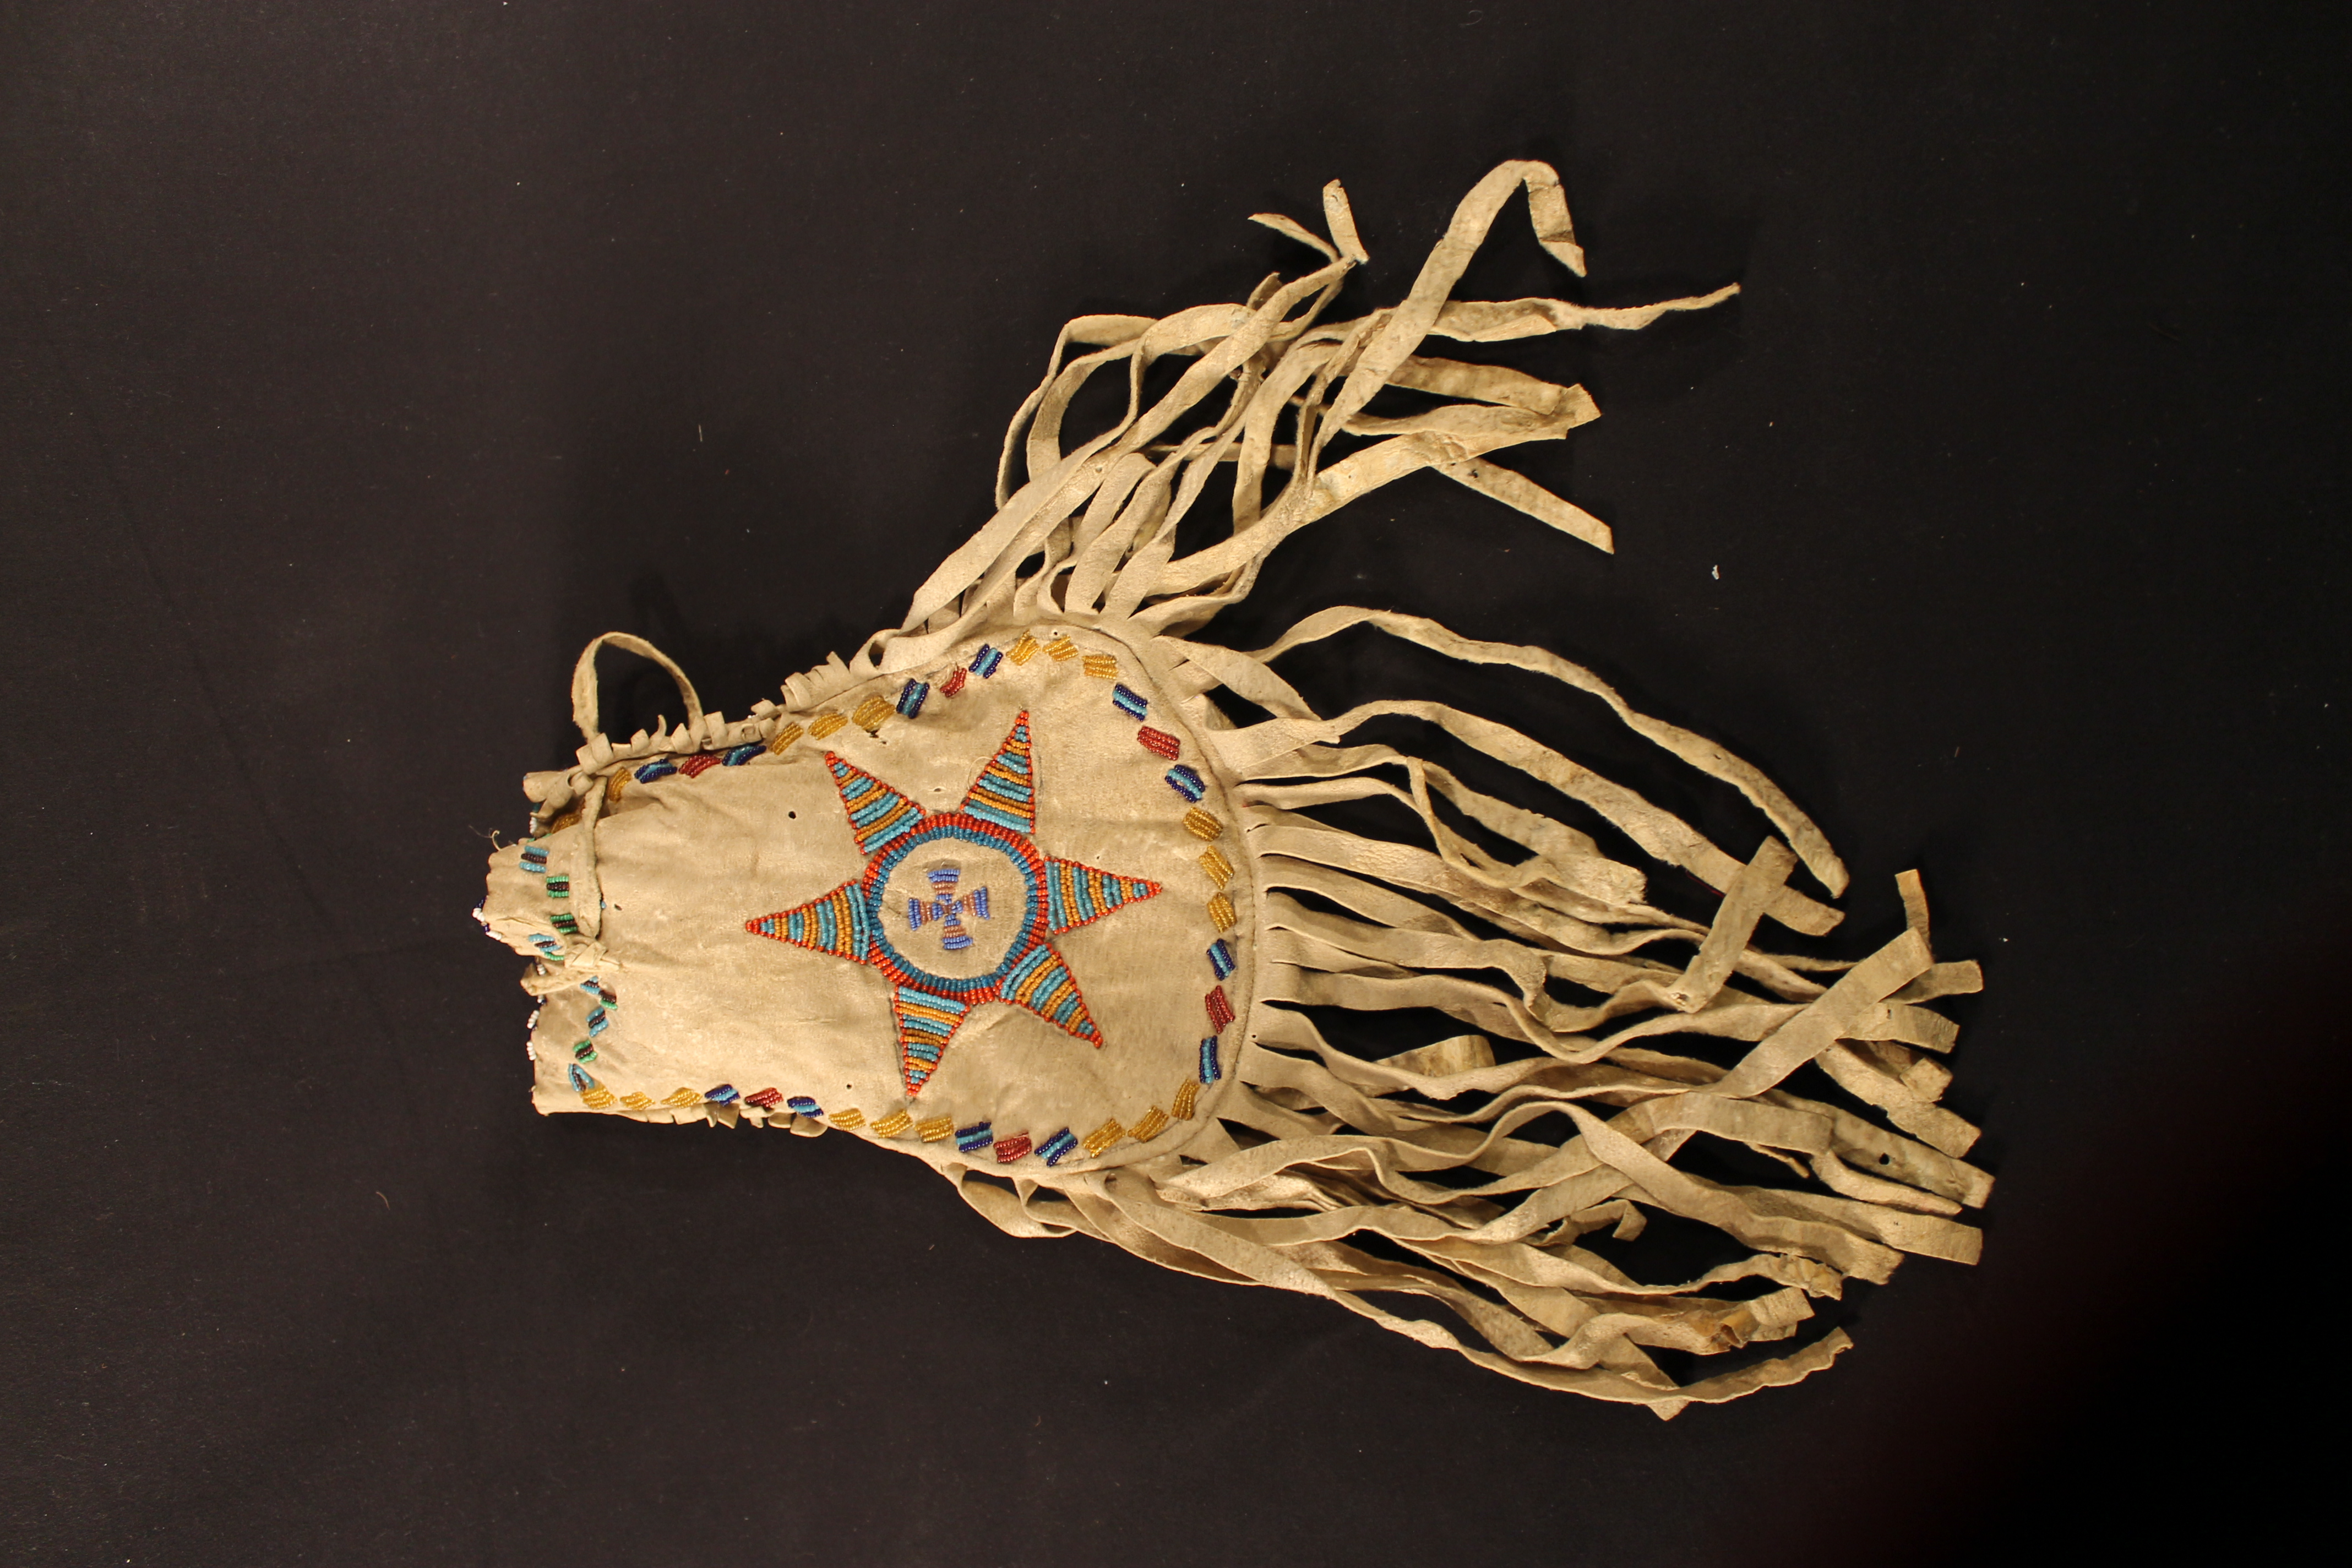  The deerskin bag is decorated with a large six-pointed star of blue, gold, and orange beads, with a cross of blue and pink beads in the center. The bottom half is lined with fringe.